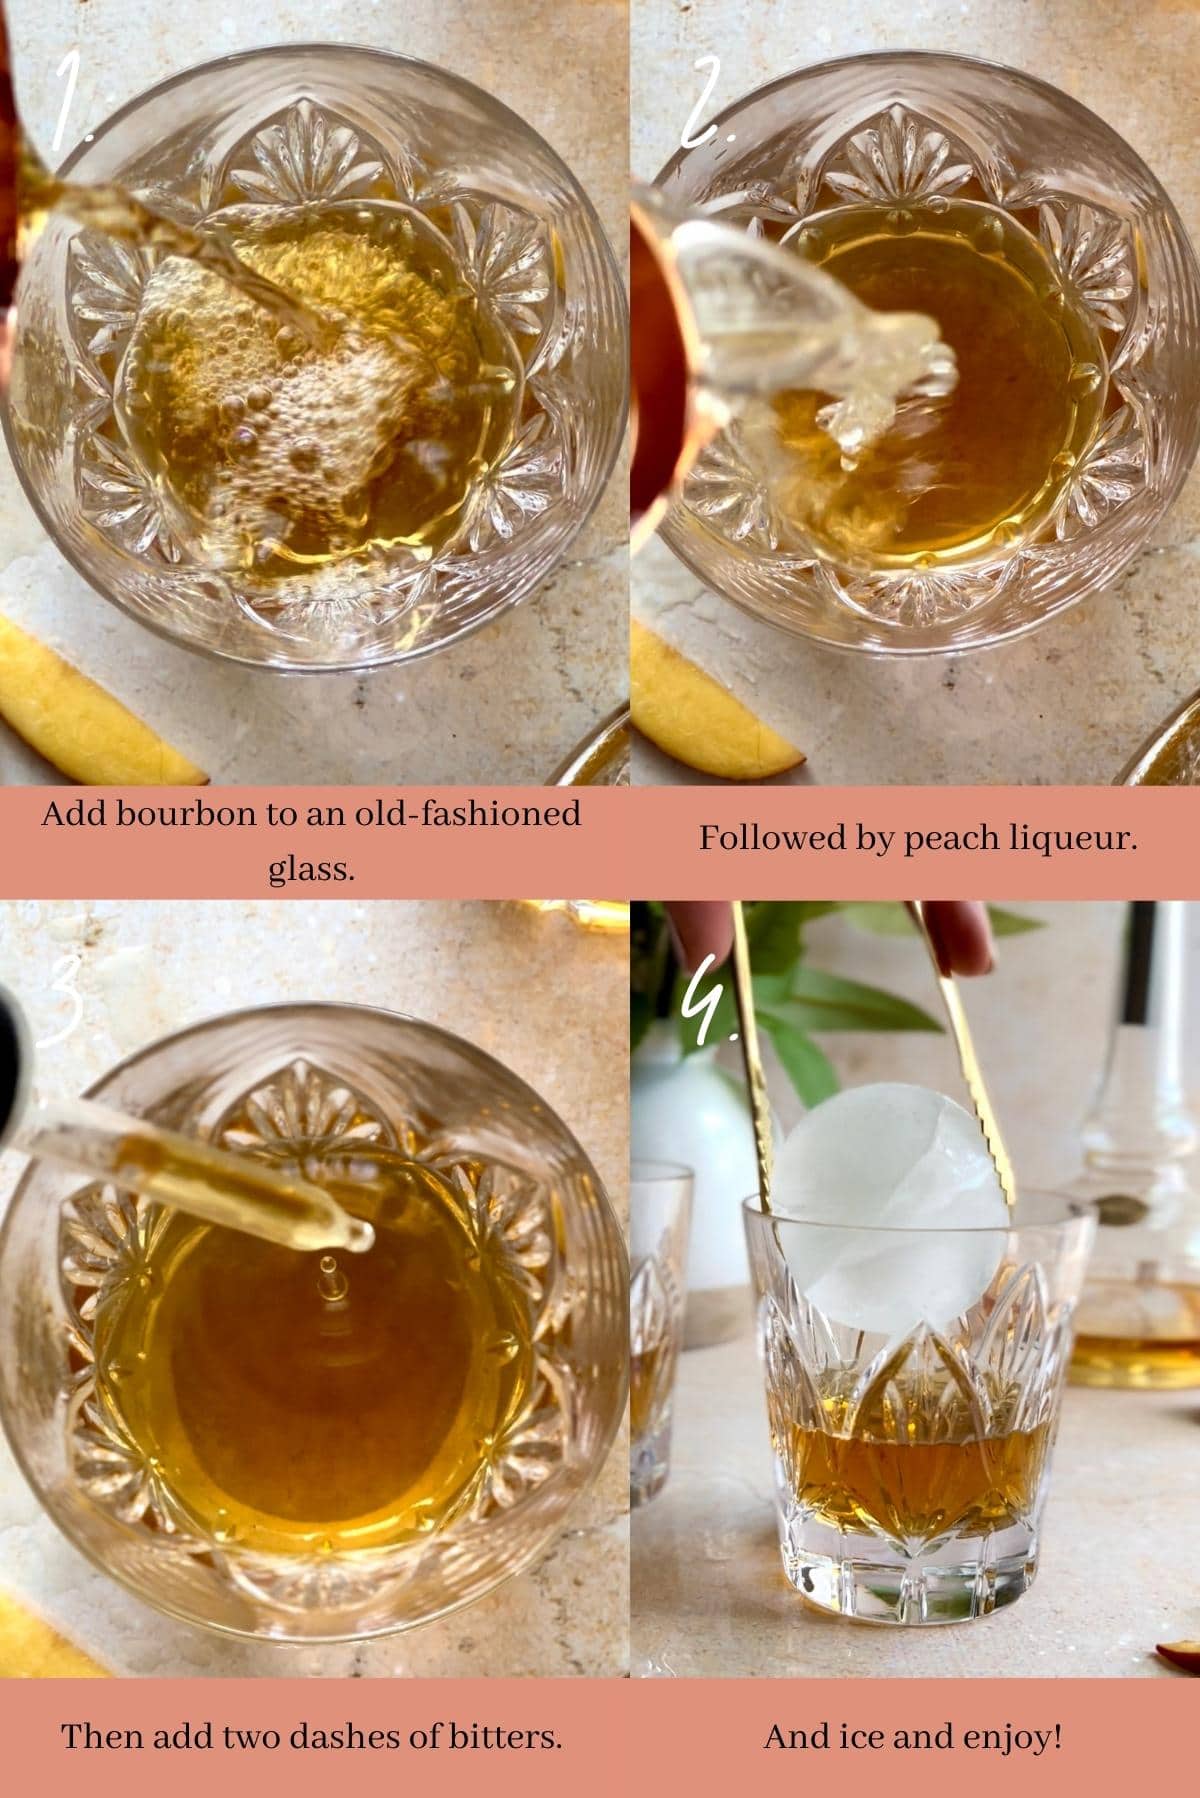 Collage showing how to make a peach old fashioned.